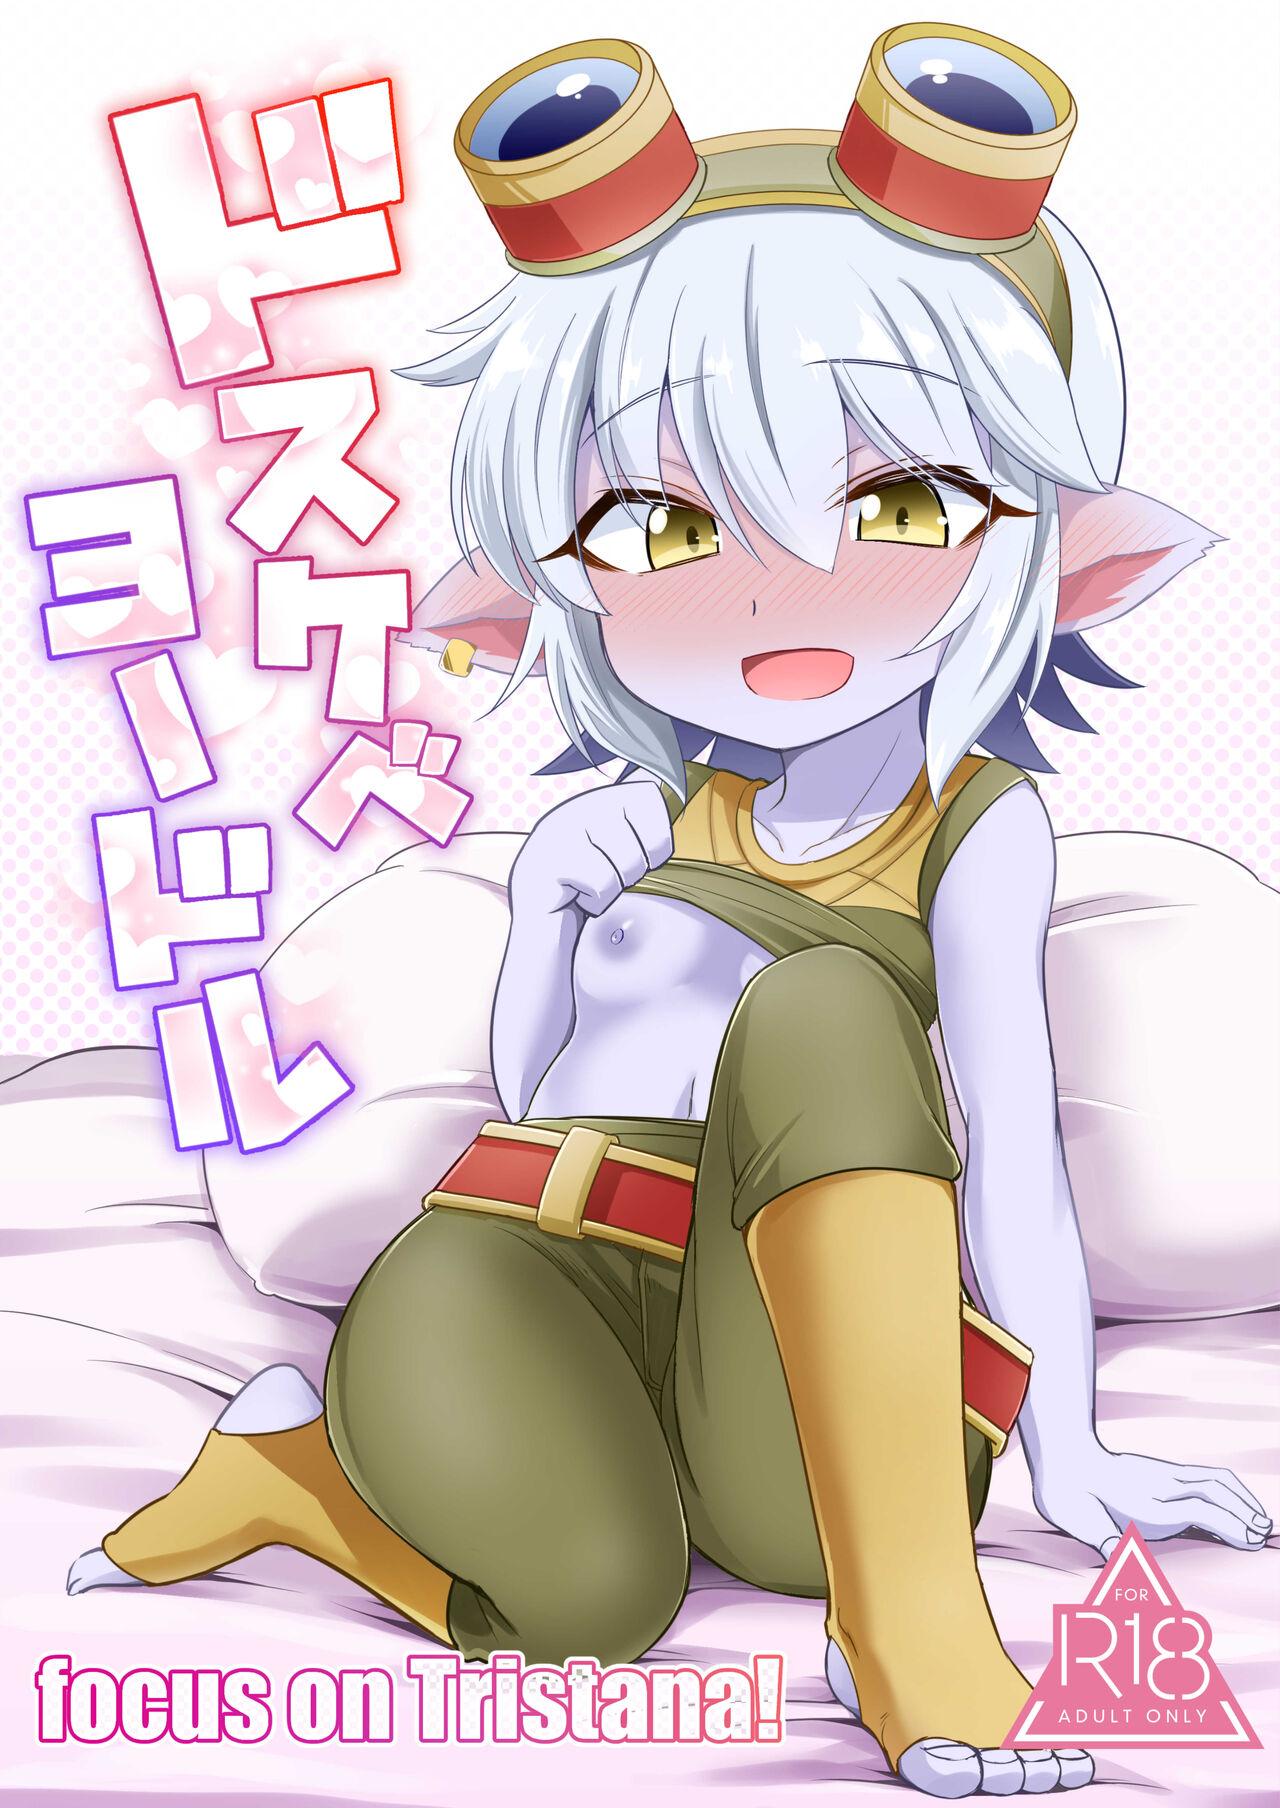 Bang Dosukebe Yodle focus on tristana! - League of legends Making Love Porn - Page 1